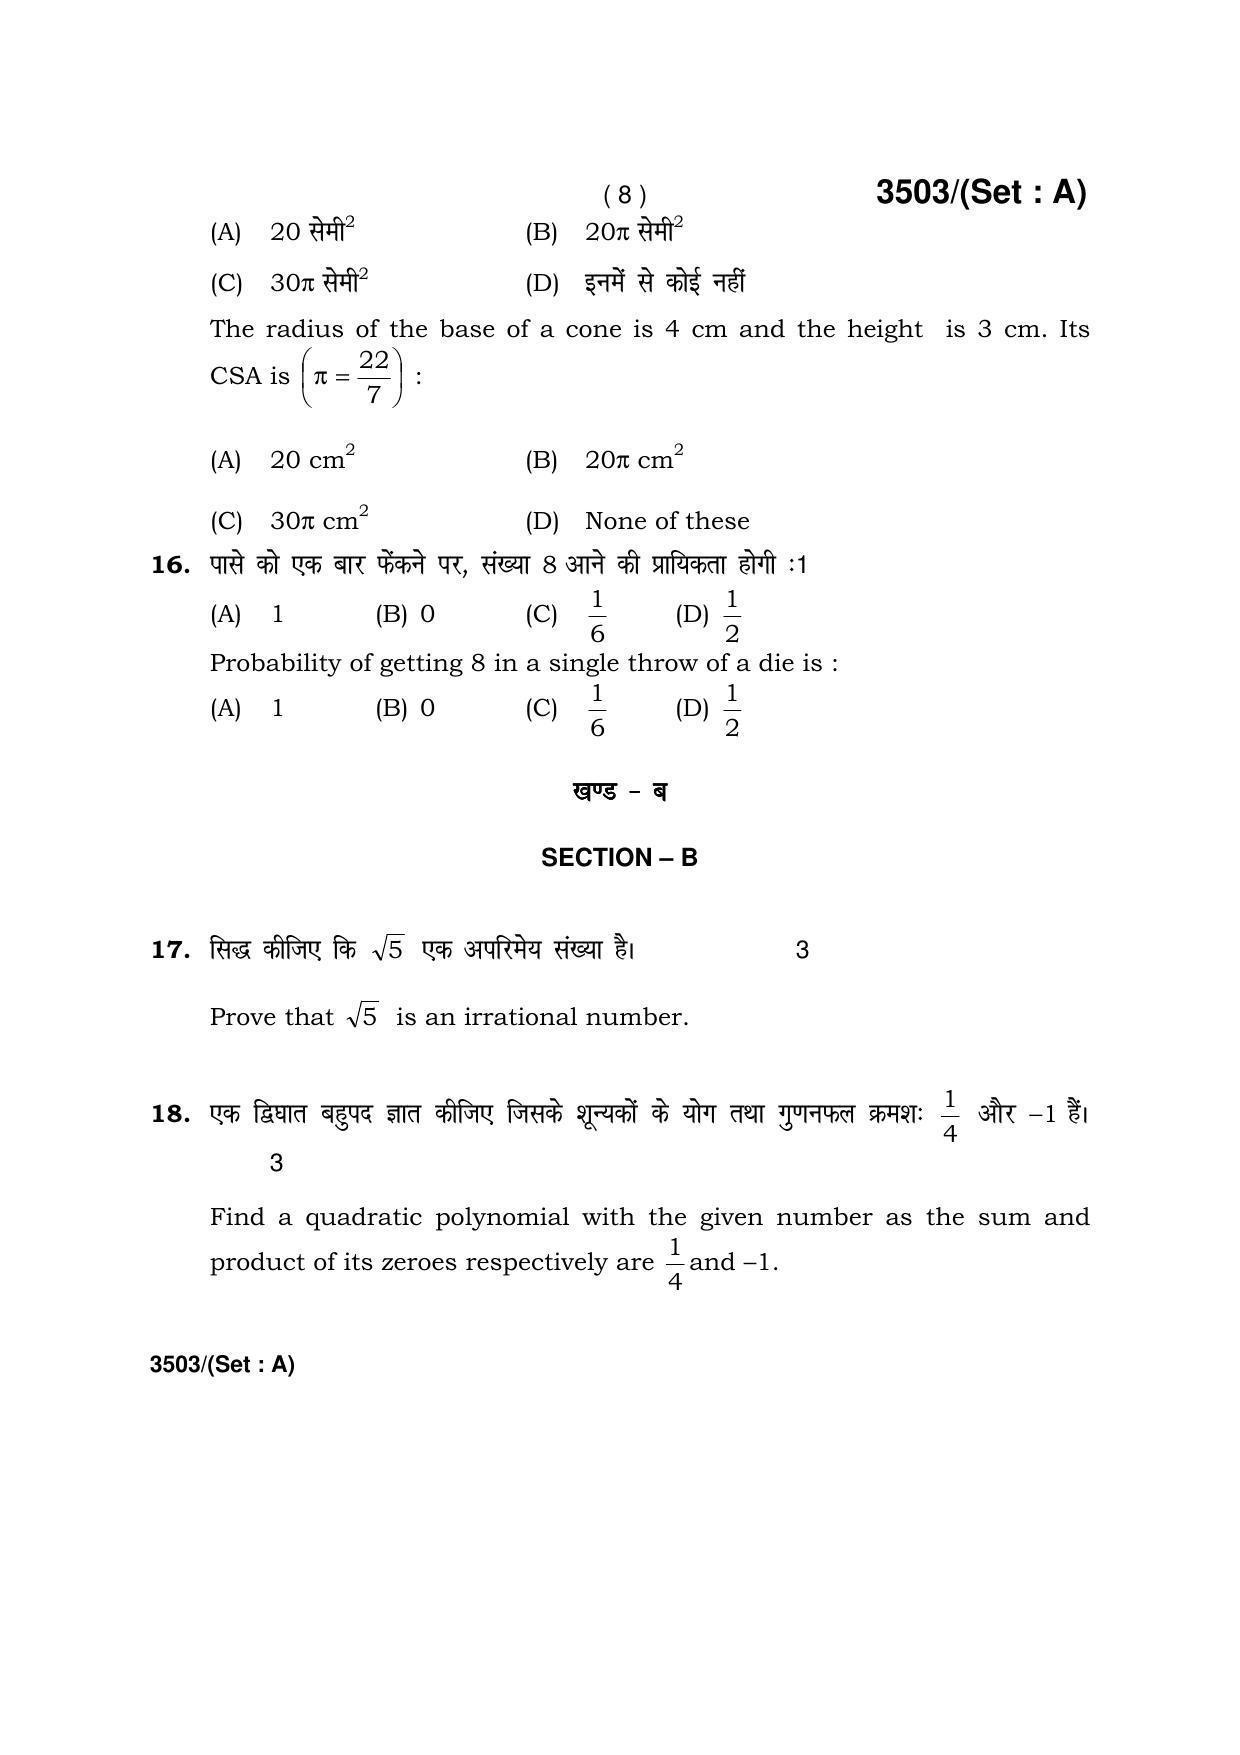 Haryana Board HBSE Class 10 Mathematics -A 2018 Question Paper - Page 8